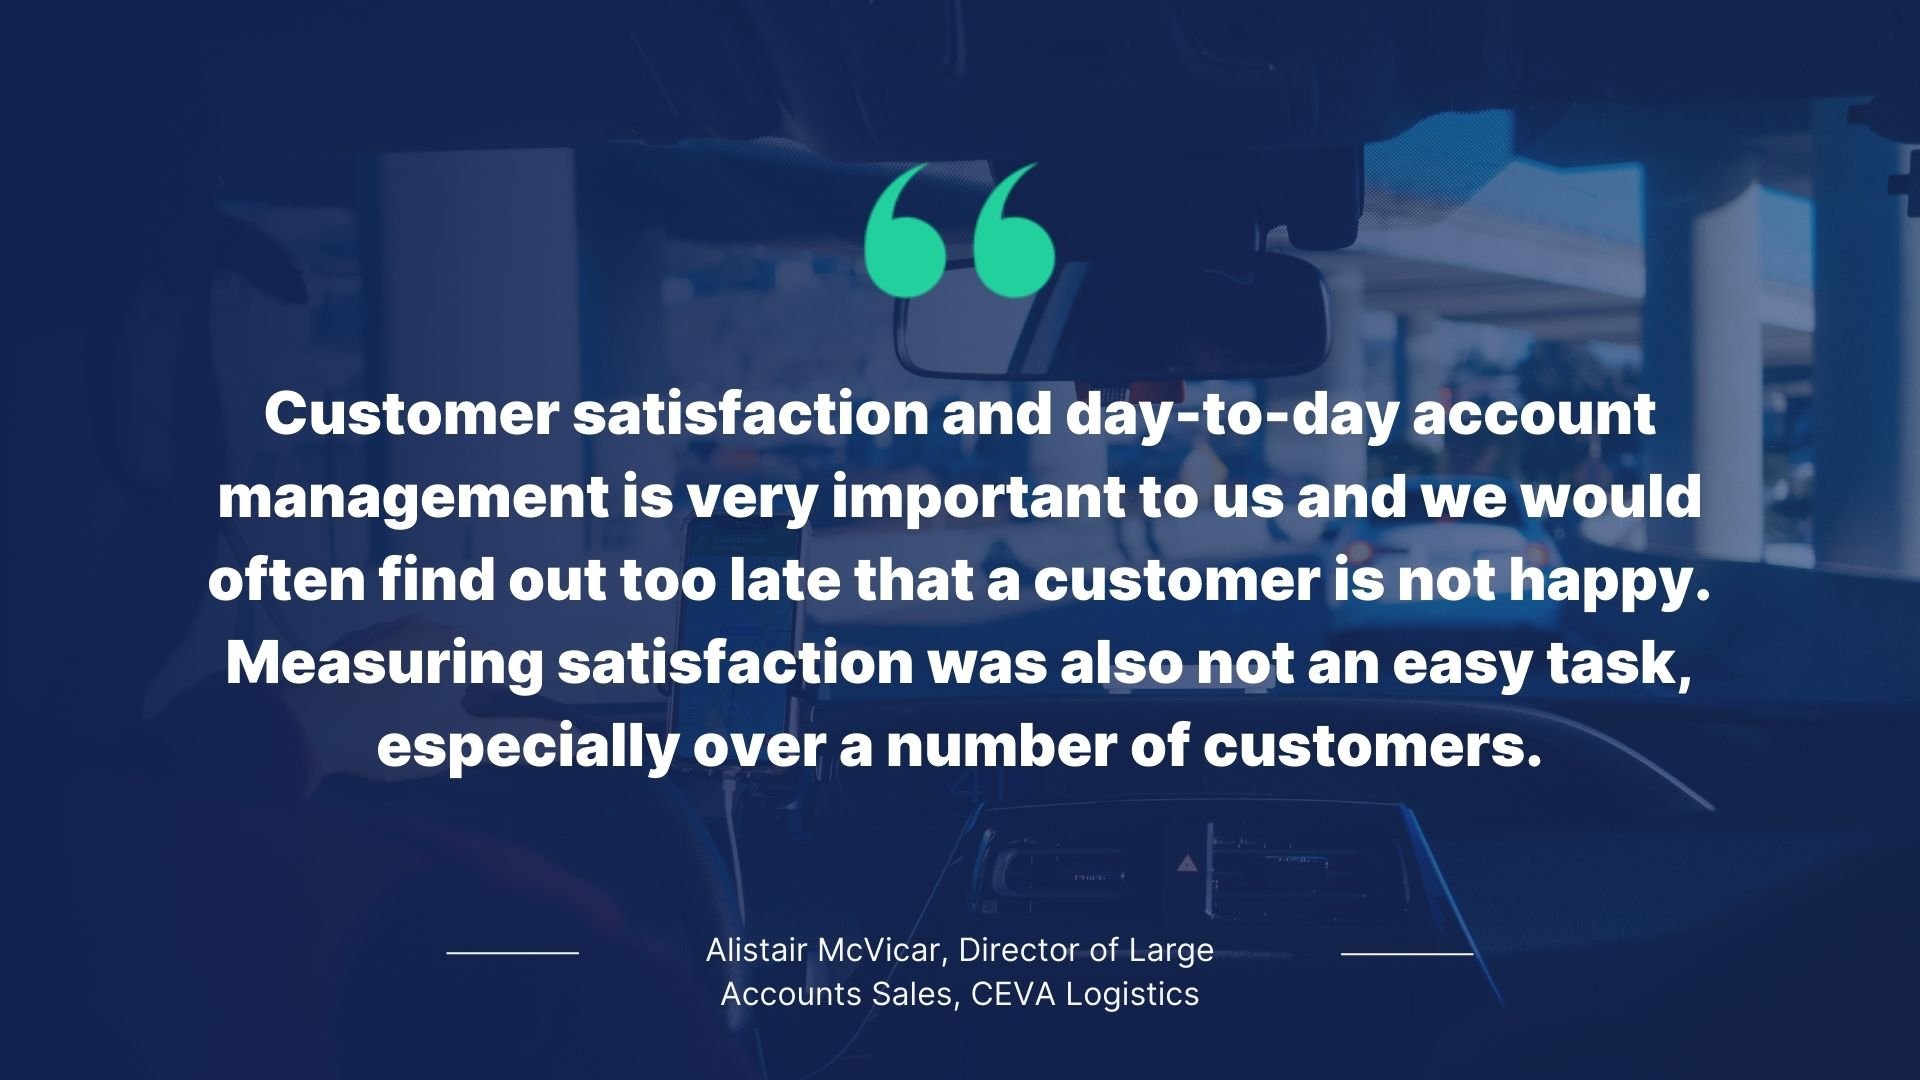 Quote be Alistair McVicar, Director of Large Accounts Sales, CEVA Logistics: Customer satisfaction and day-to-day account management is very important to us and we would often find out too late that a customer is not happy. Measuring satisfaction was also not an easy task, especially over a number of customers.